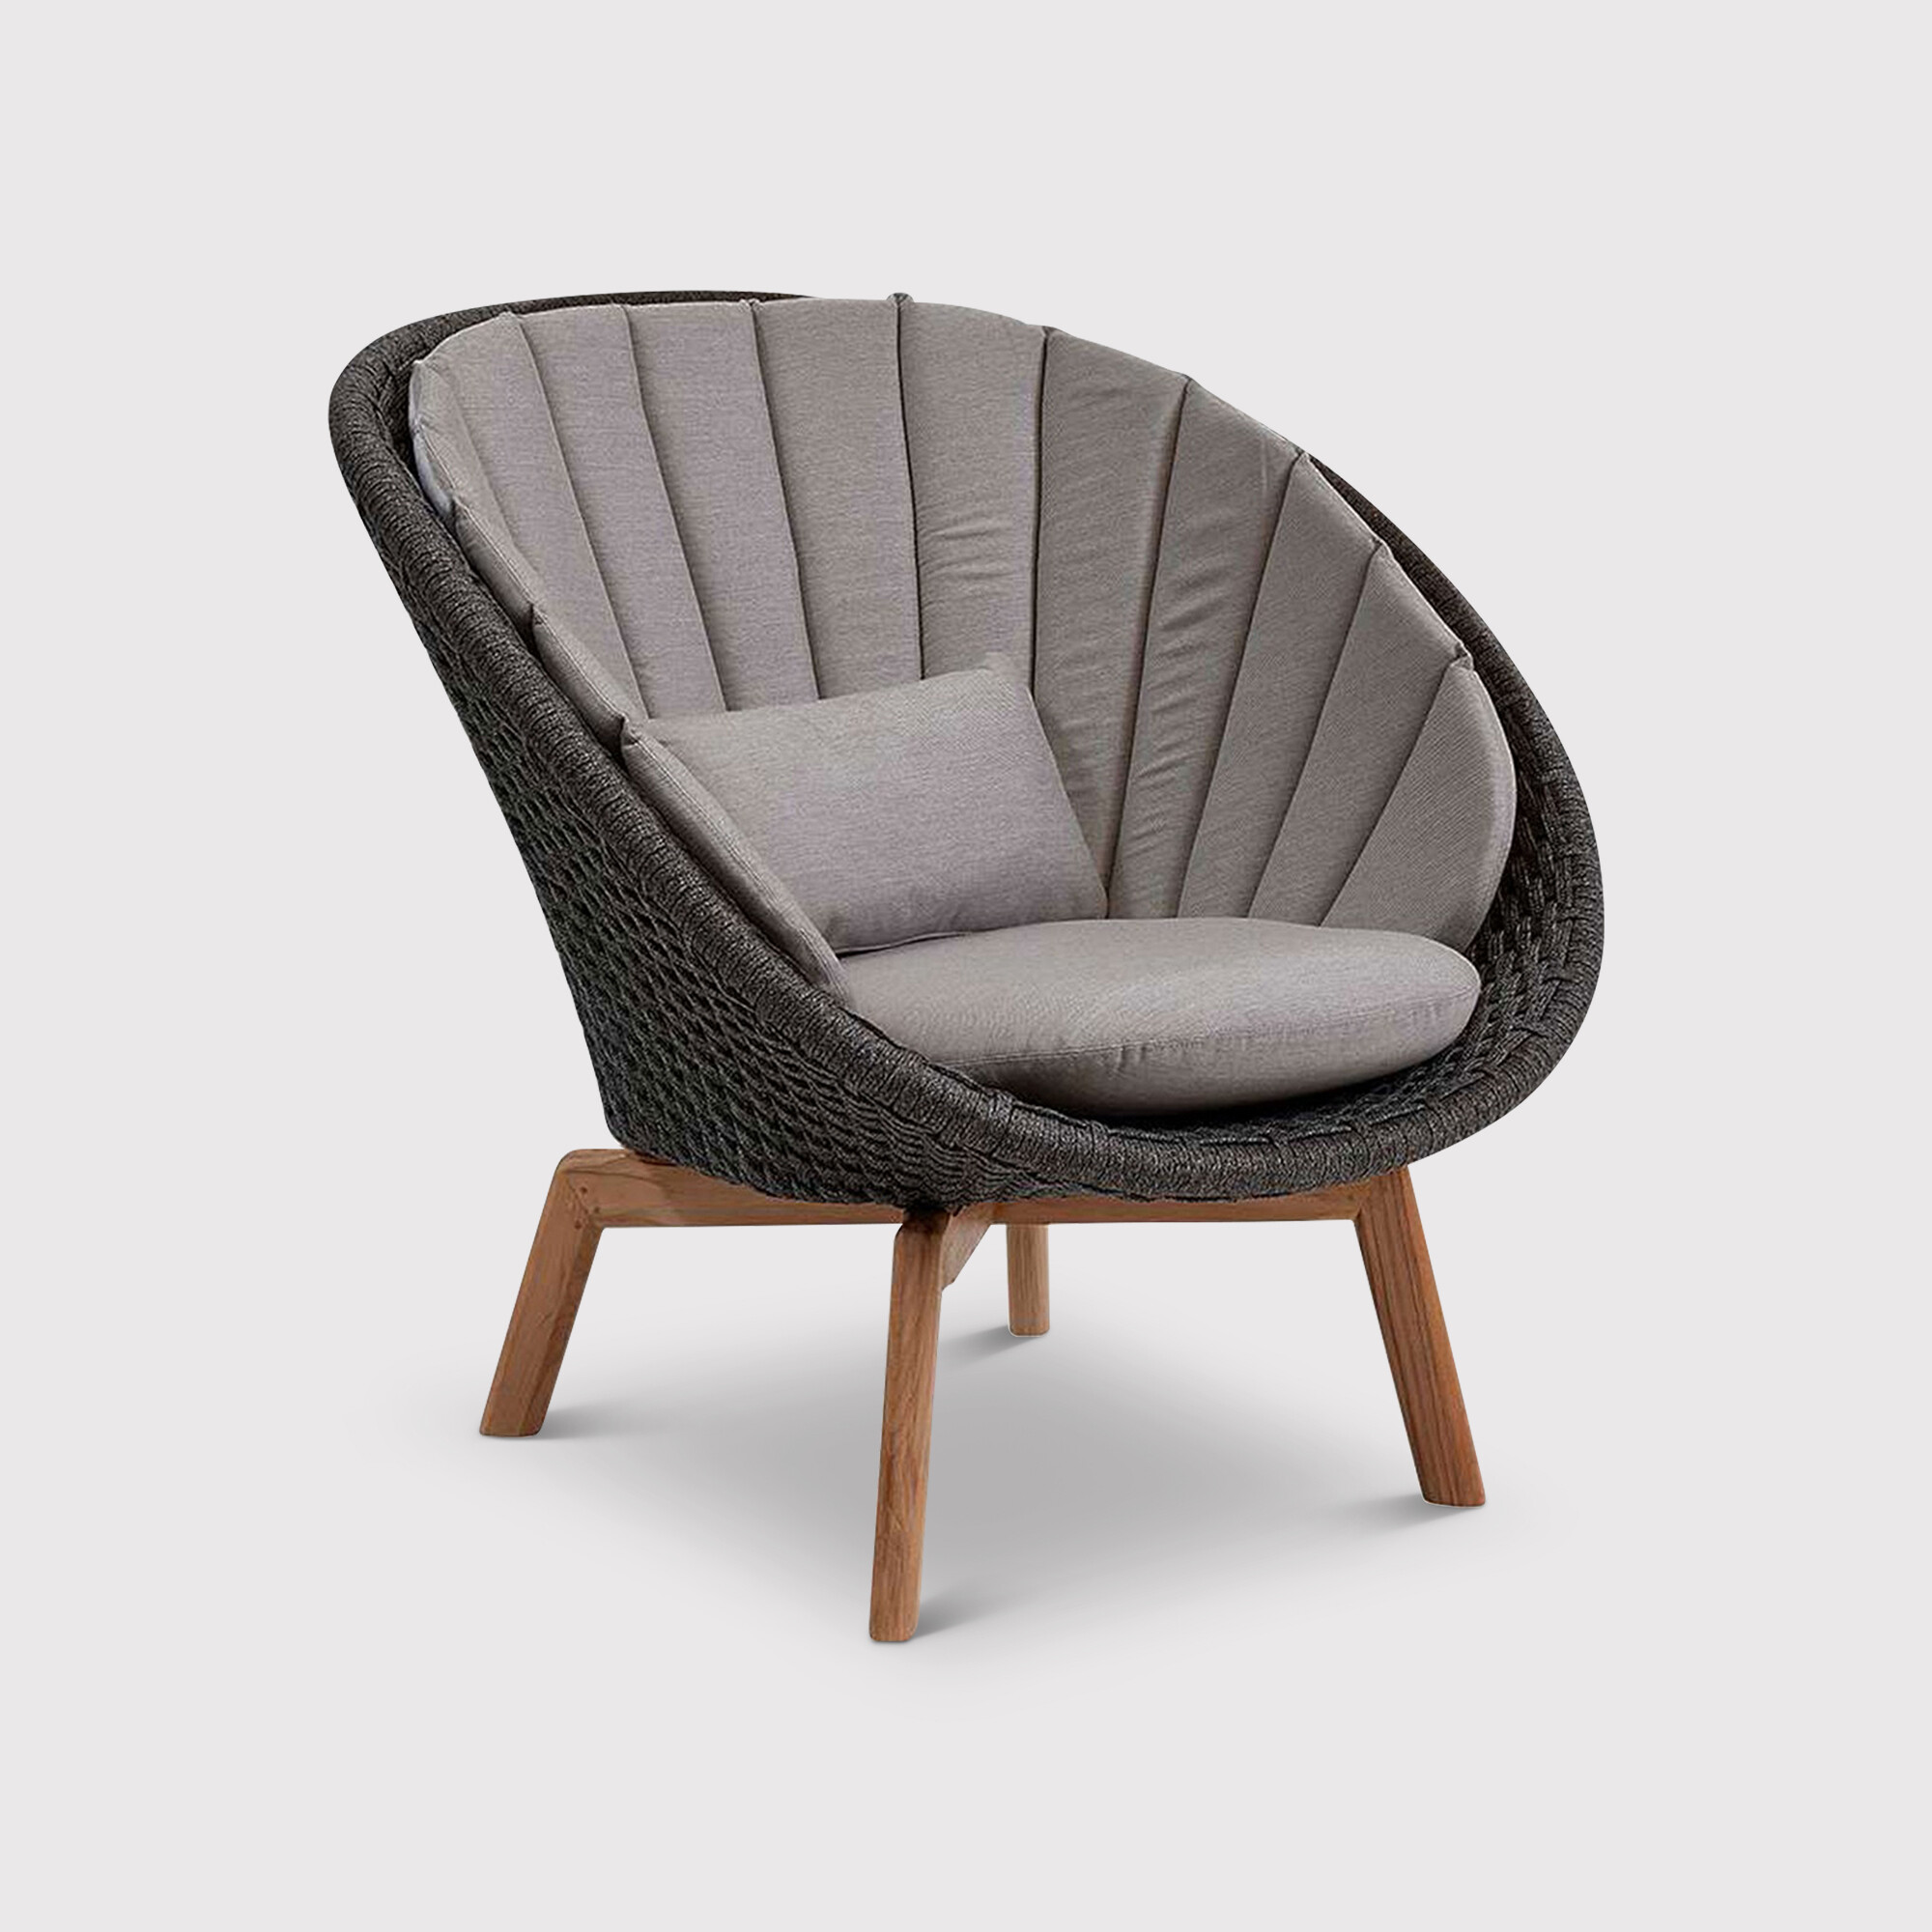 Cane Line Peacock Lounge Chair With Cushion Set, Grey Wood | Barker & Stonehouse